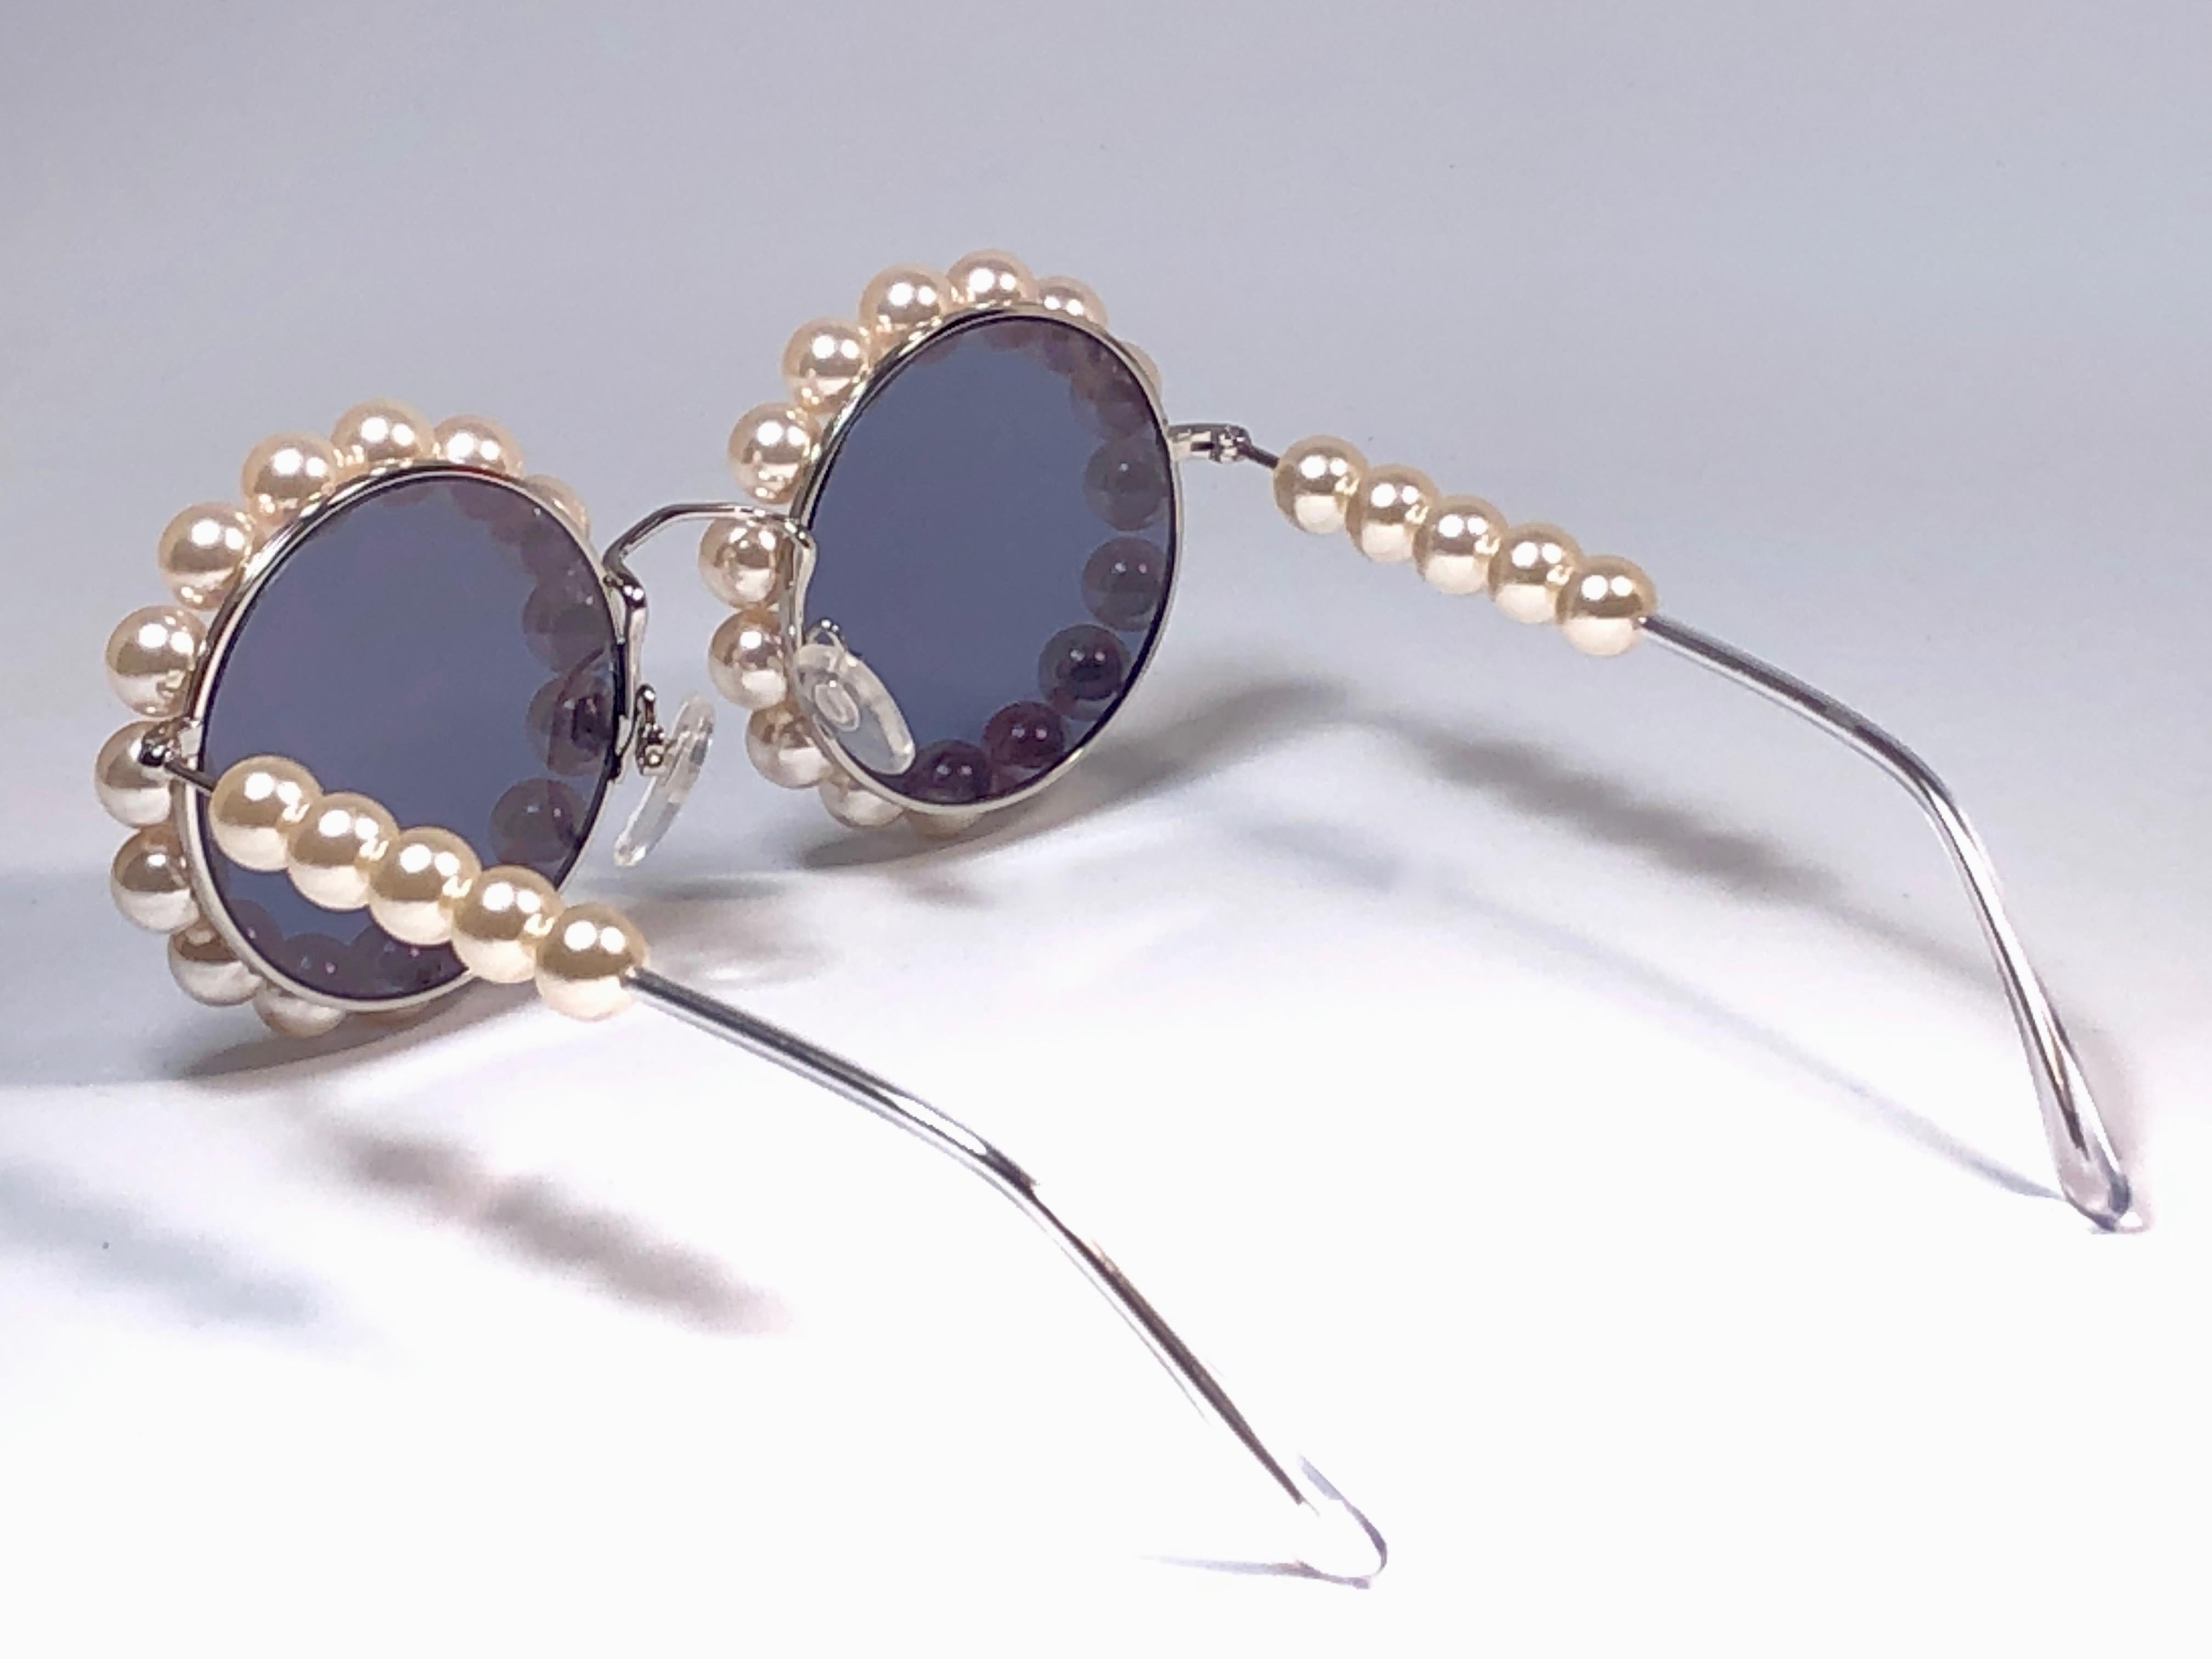 Chanel Vintage Runway Pearls Spring Summer 1994 Sunglasses Made In Italy For Sale 2